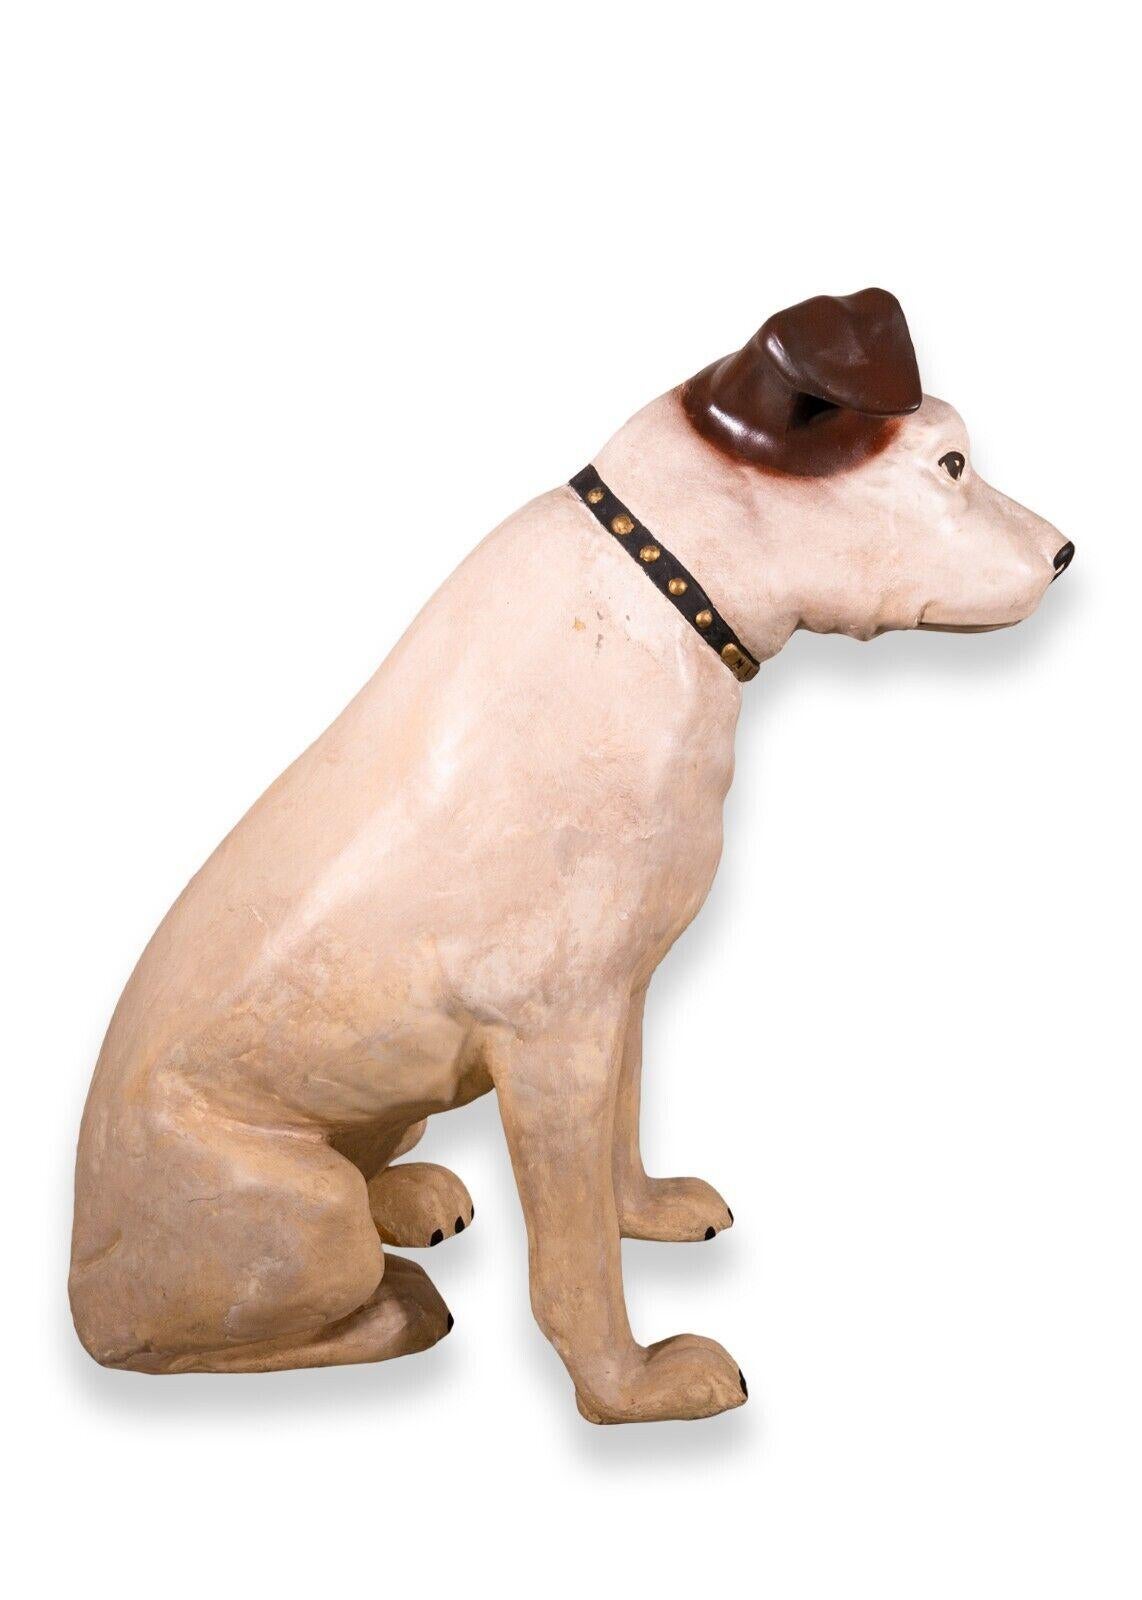 A vintage RCA Nipper the dog store display sculpture. A super cool collectable store display. This piece is Nipper the Dog, a advertising icon from RCA Records. The dog's origin comes from RCA's original brand in Victor Talking Machine Co. They used